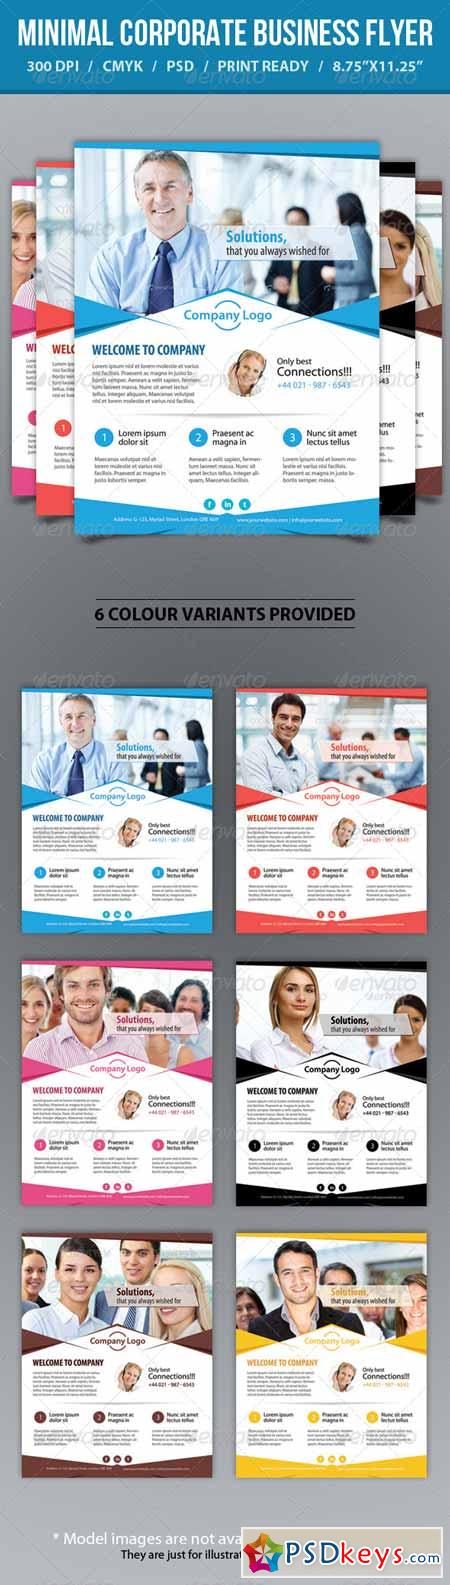 Minimal Corporate Business Promotion Flyer 4690874